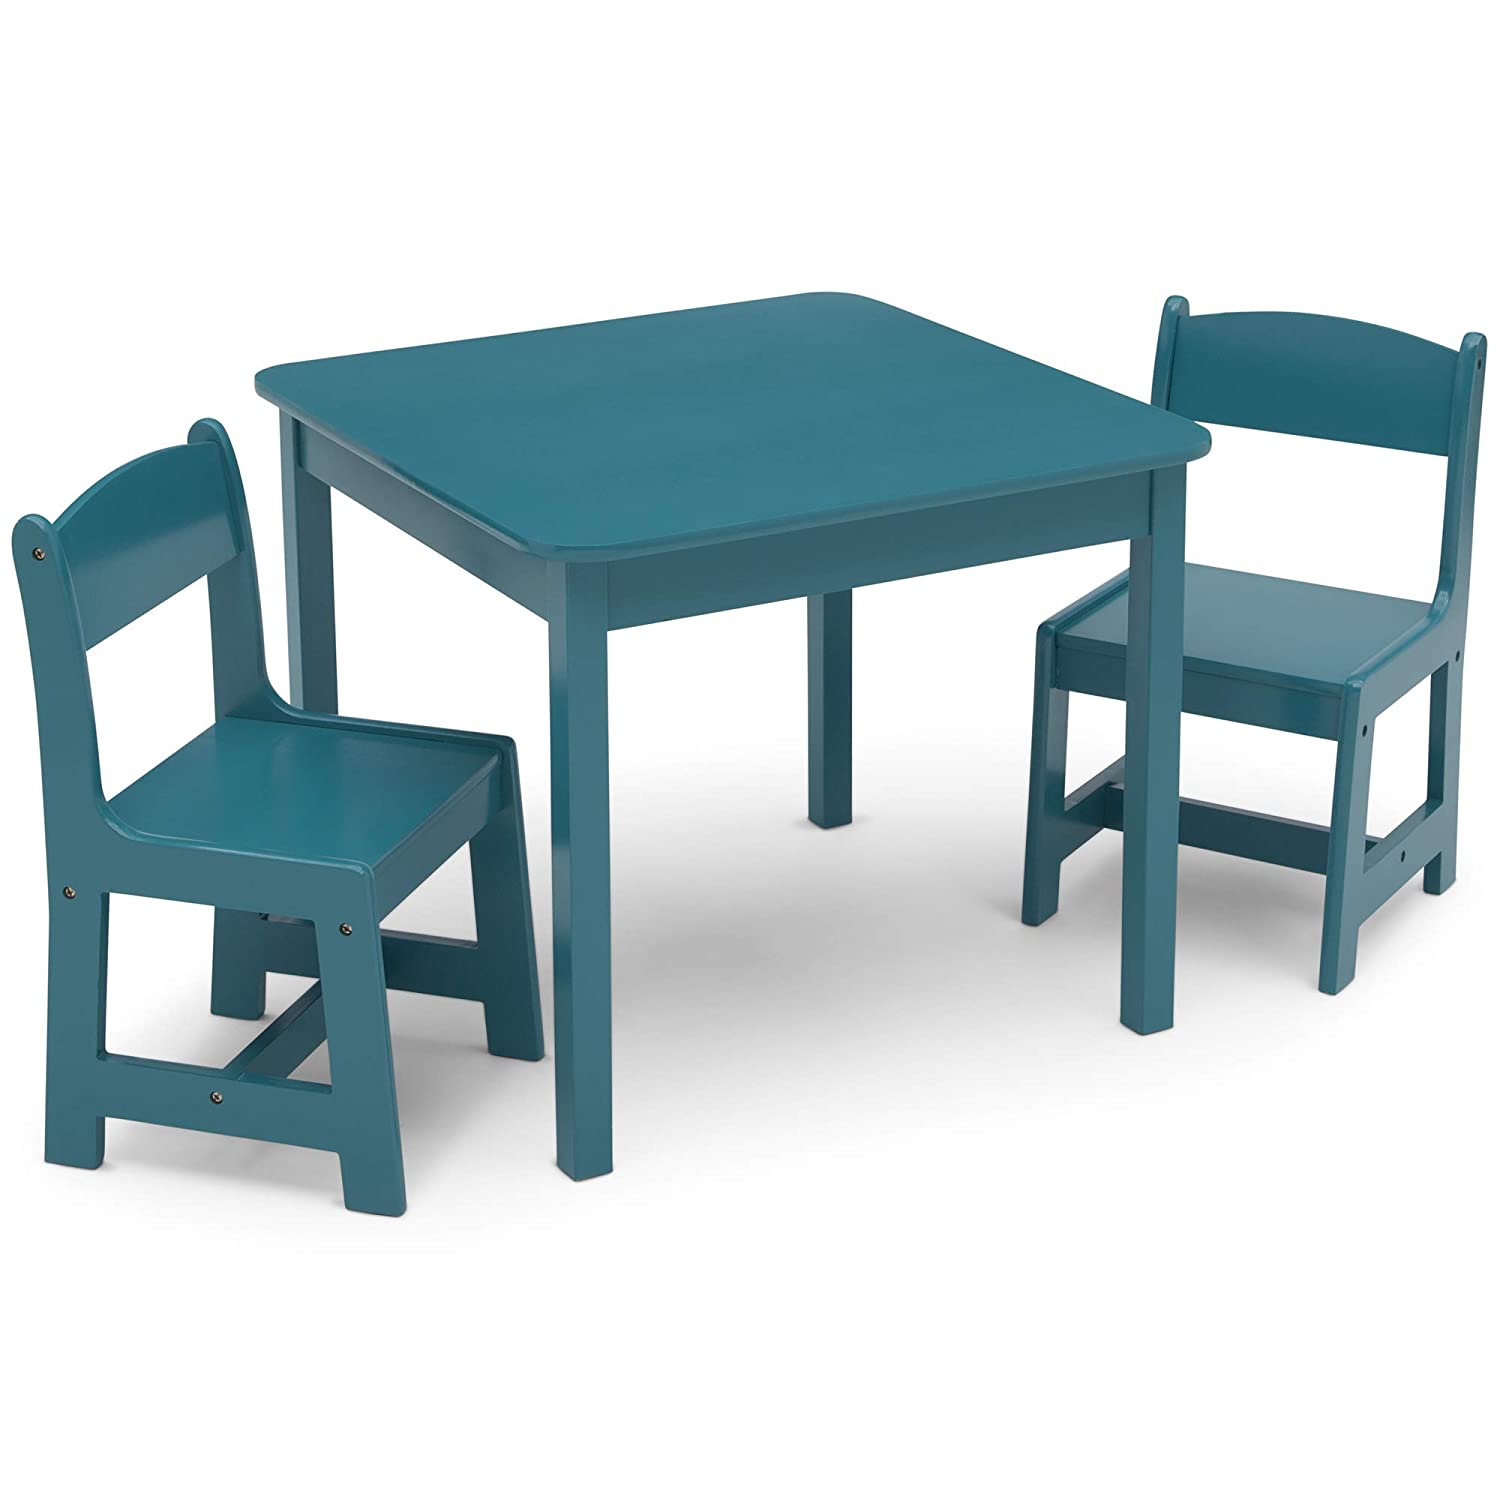 

Children MySize Kids Wood Table and Chair Set (2 Chairs Included) - Ideal for Arts & Crafts, Snack Time, Homeschooling, Homework More, Deep Blue